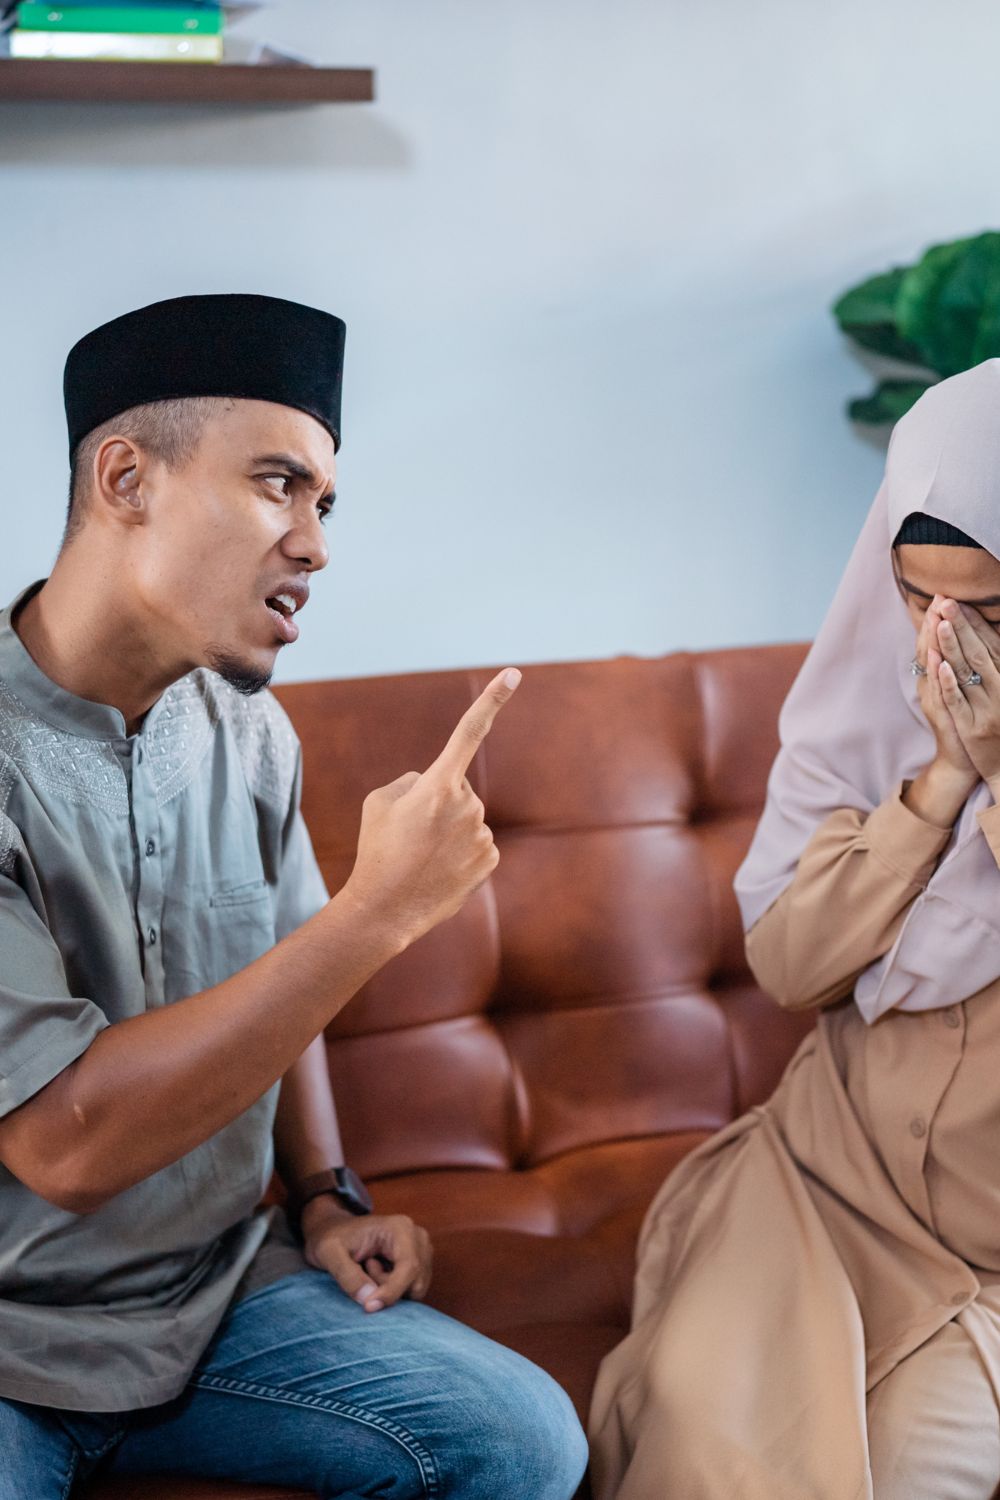 The Worst Thing a Husband Can Say To His Wife